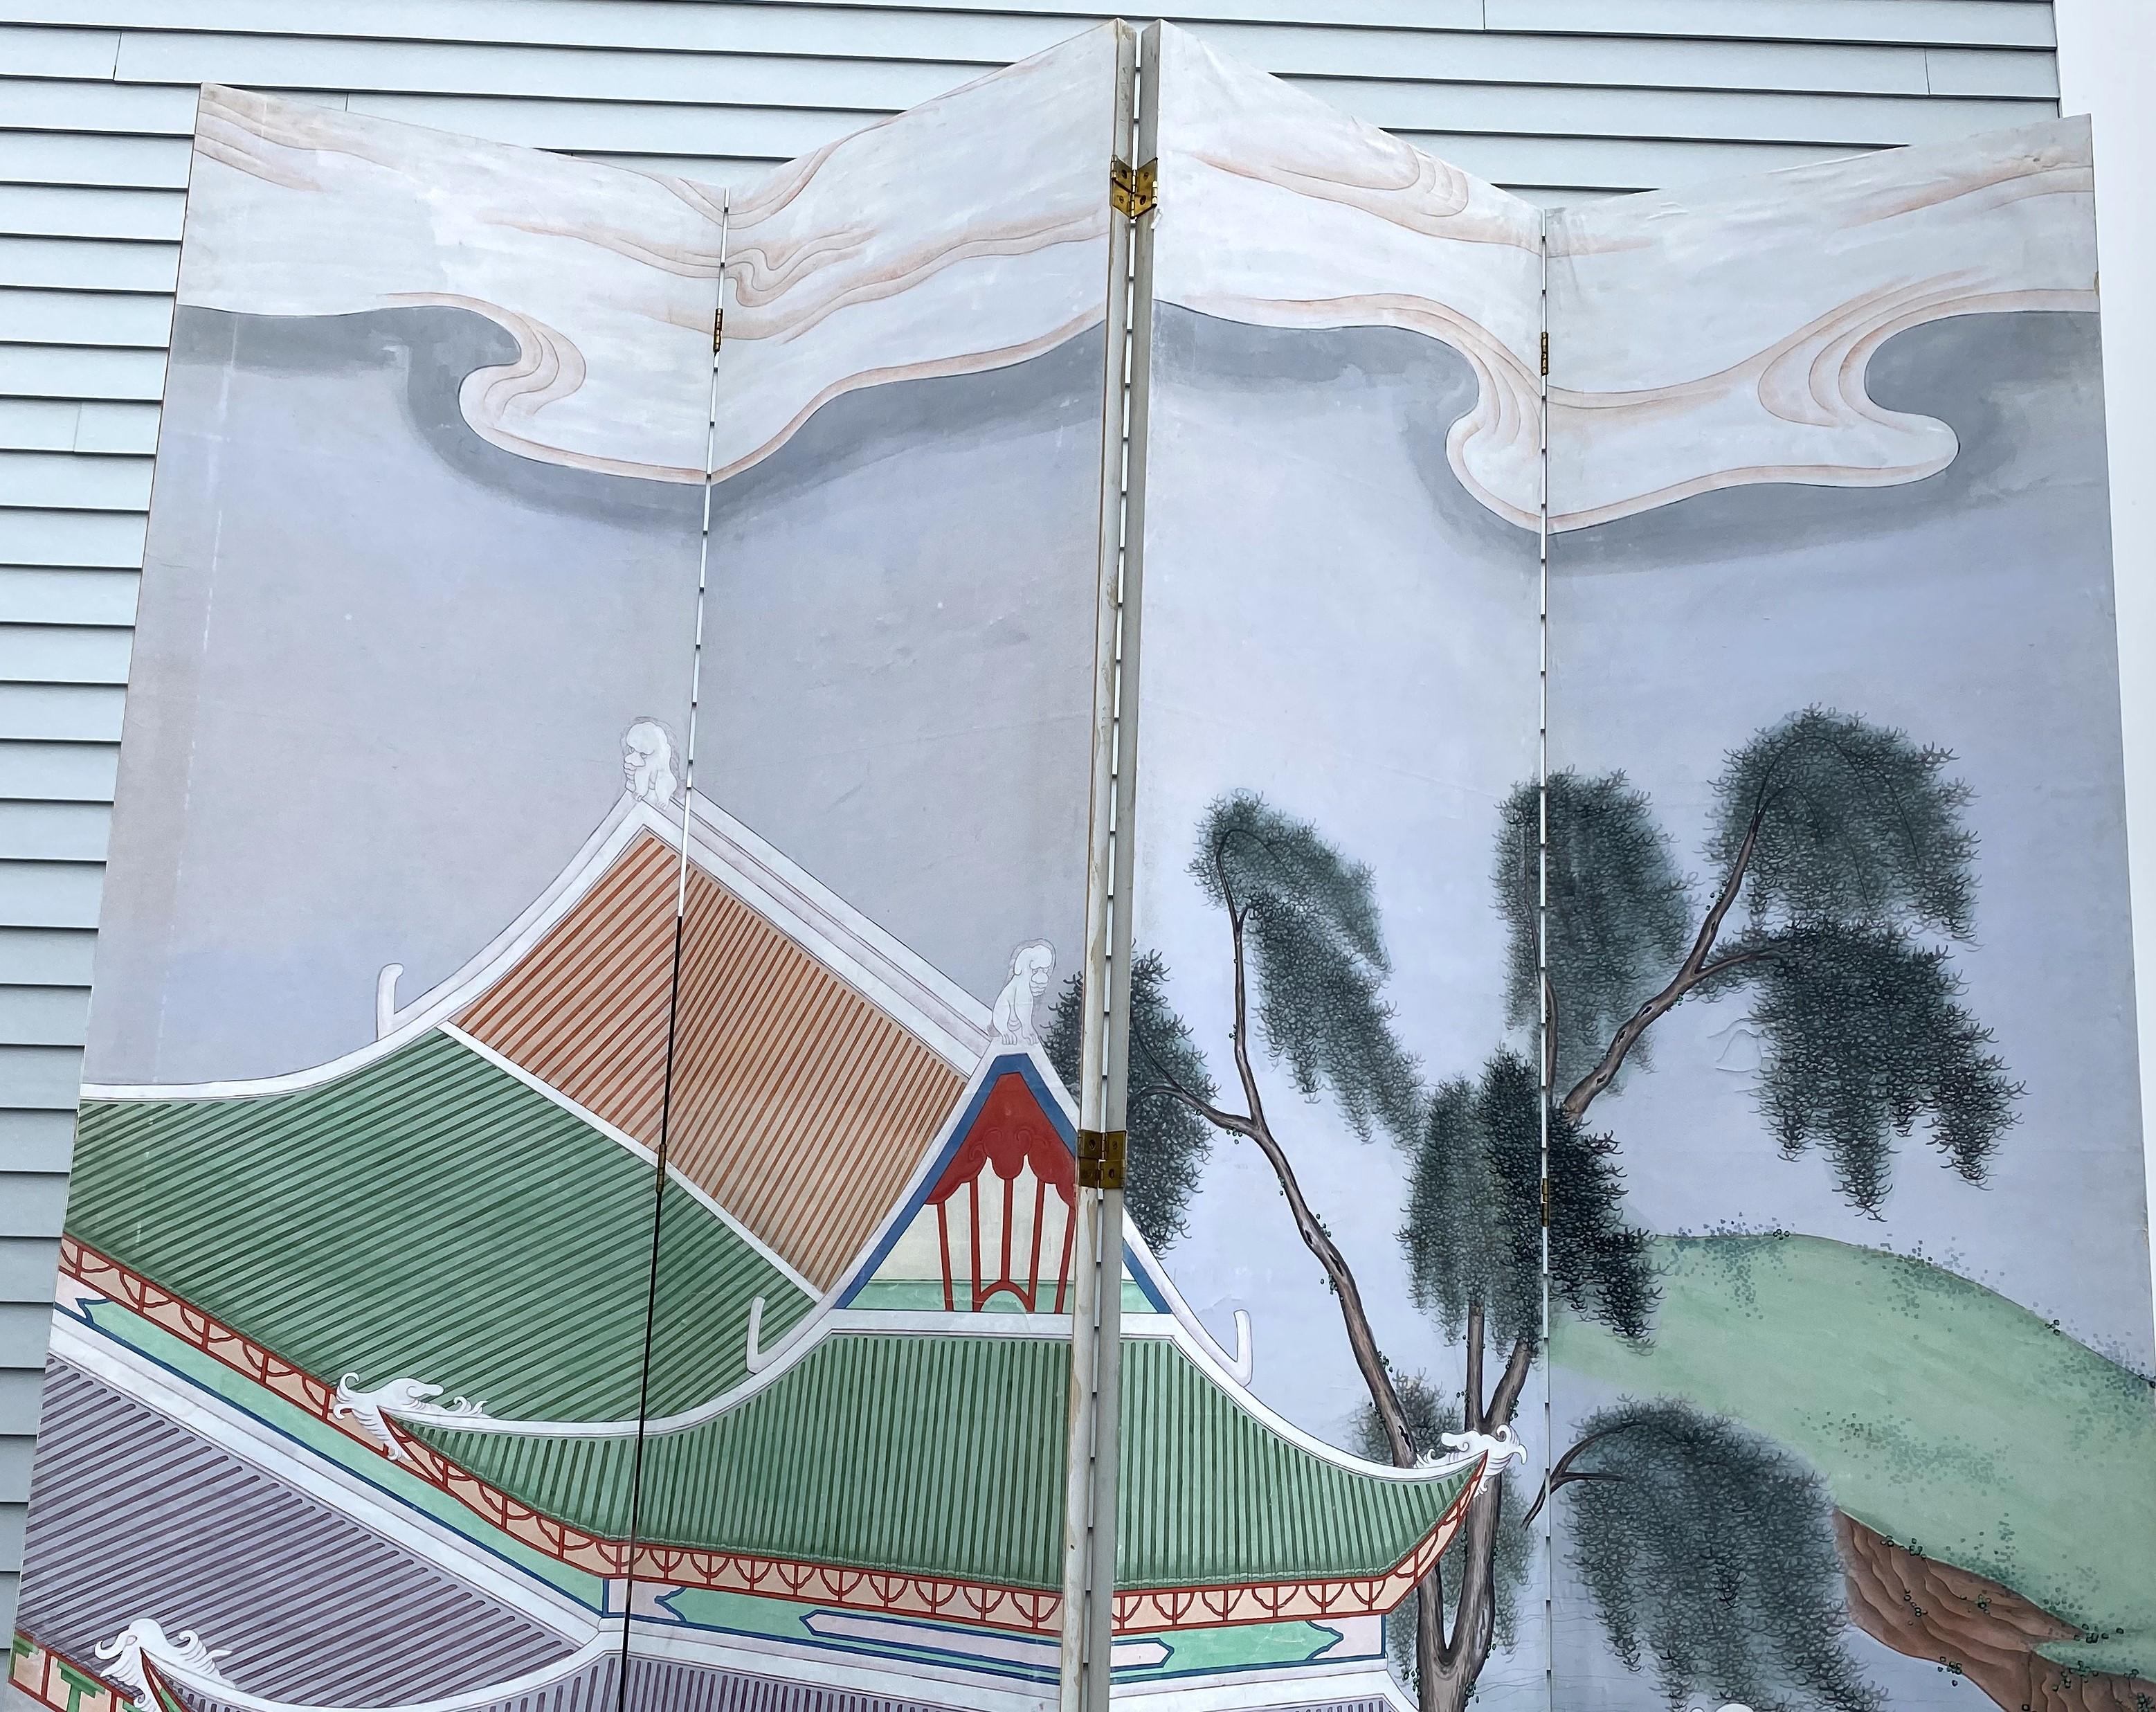 A monumental Chinese hand painted polychrome canvas on wooden frame four panel folding screen featuring village scenes and figures on both sides, with rolling hills and trees. The screen dates to the early to mid 20th century and is in very good